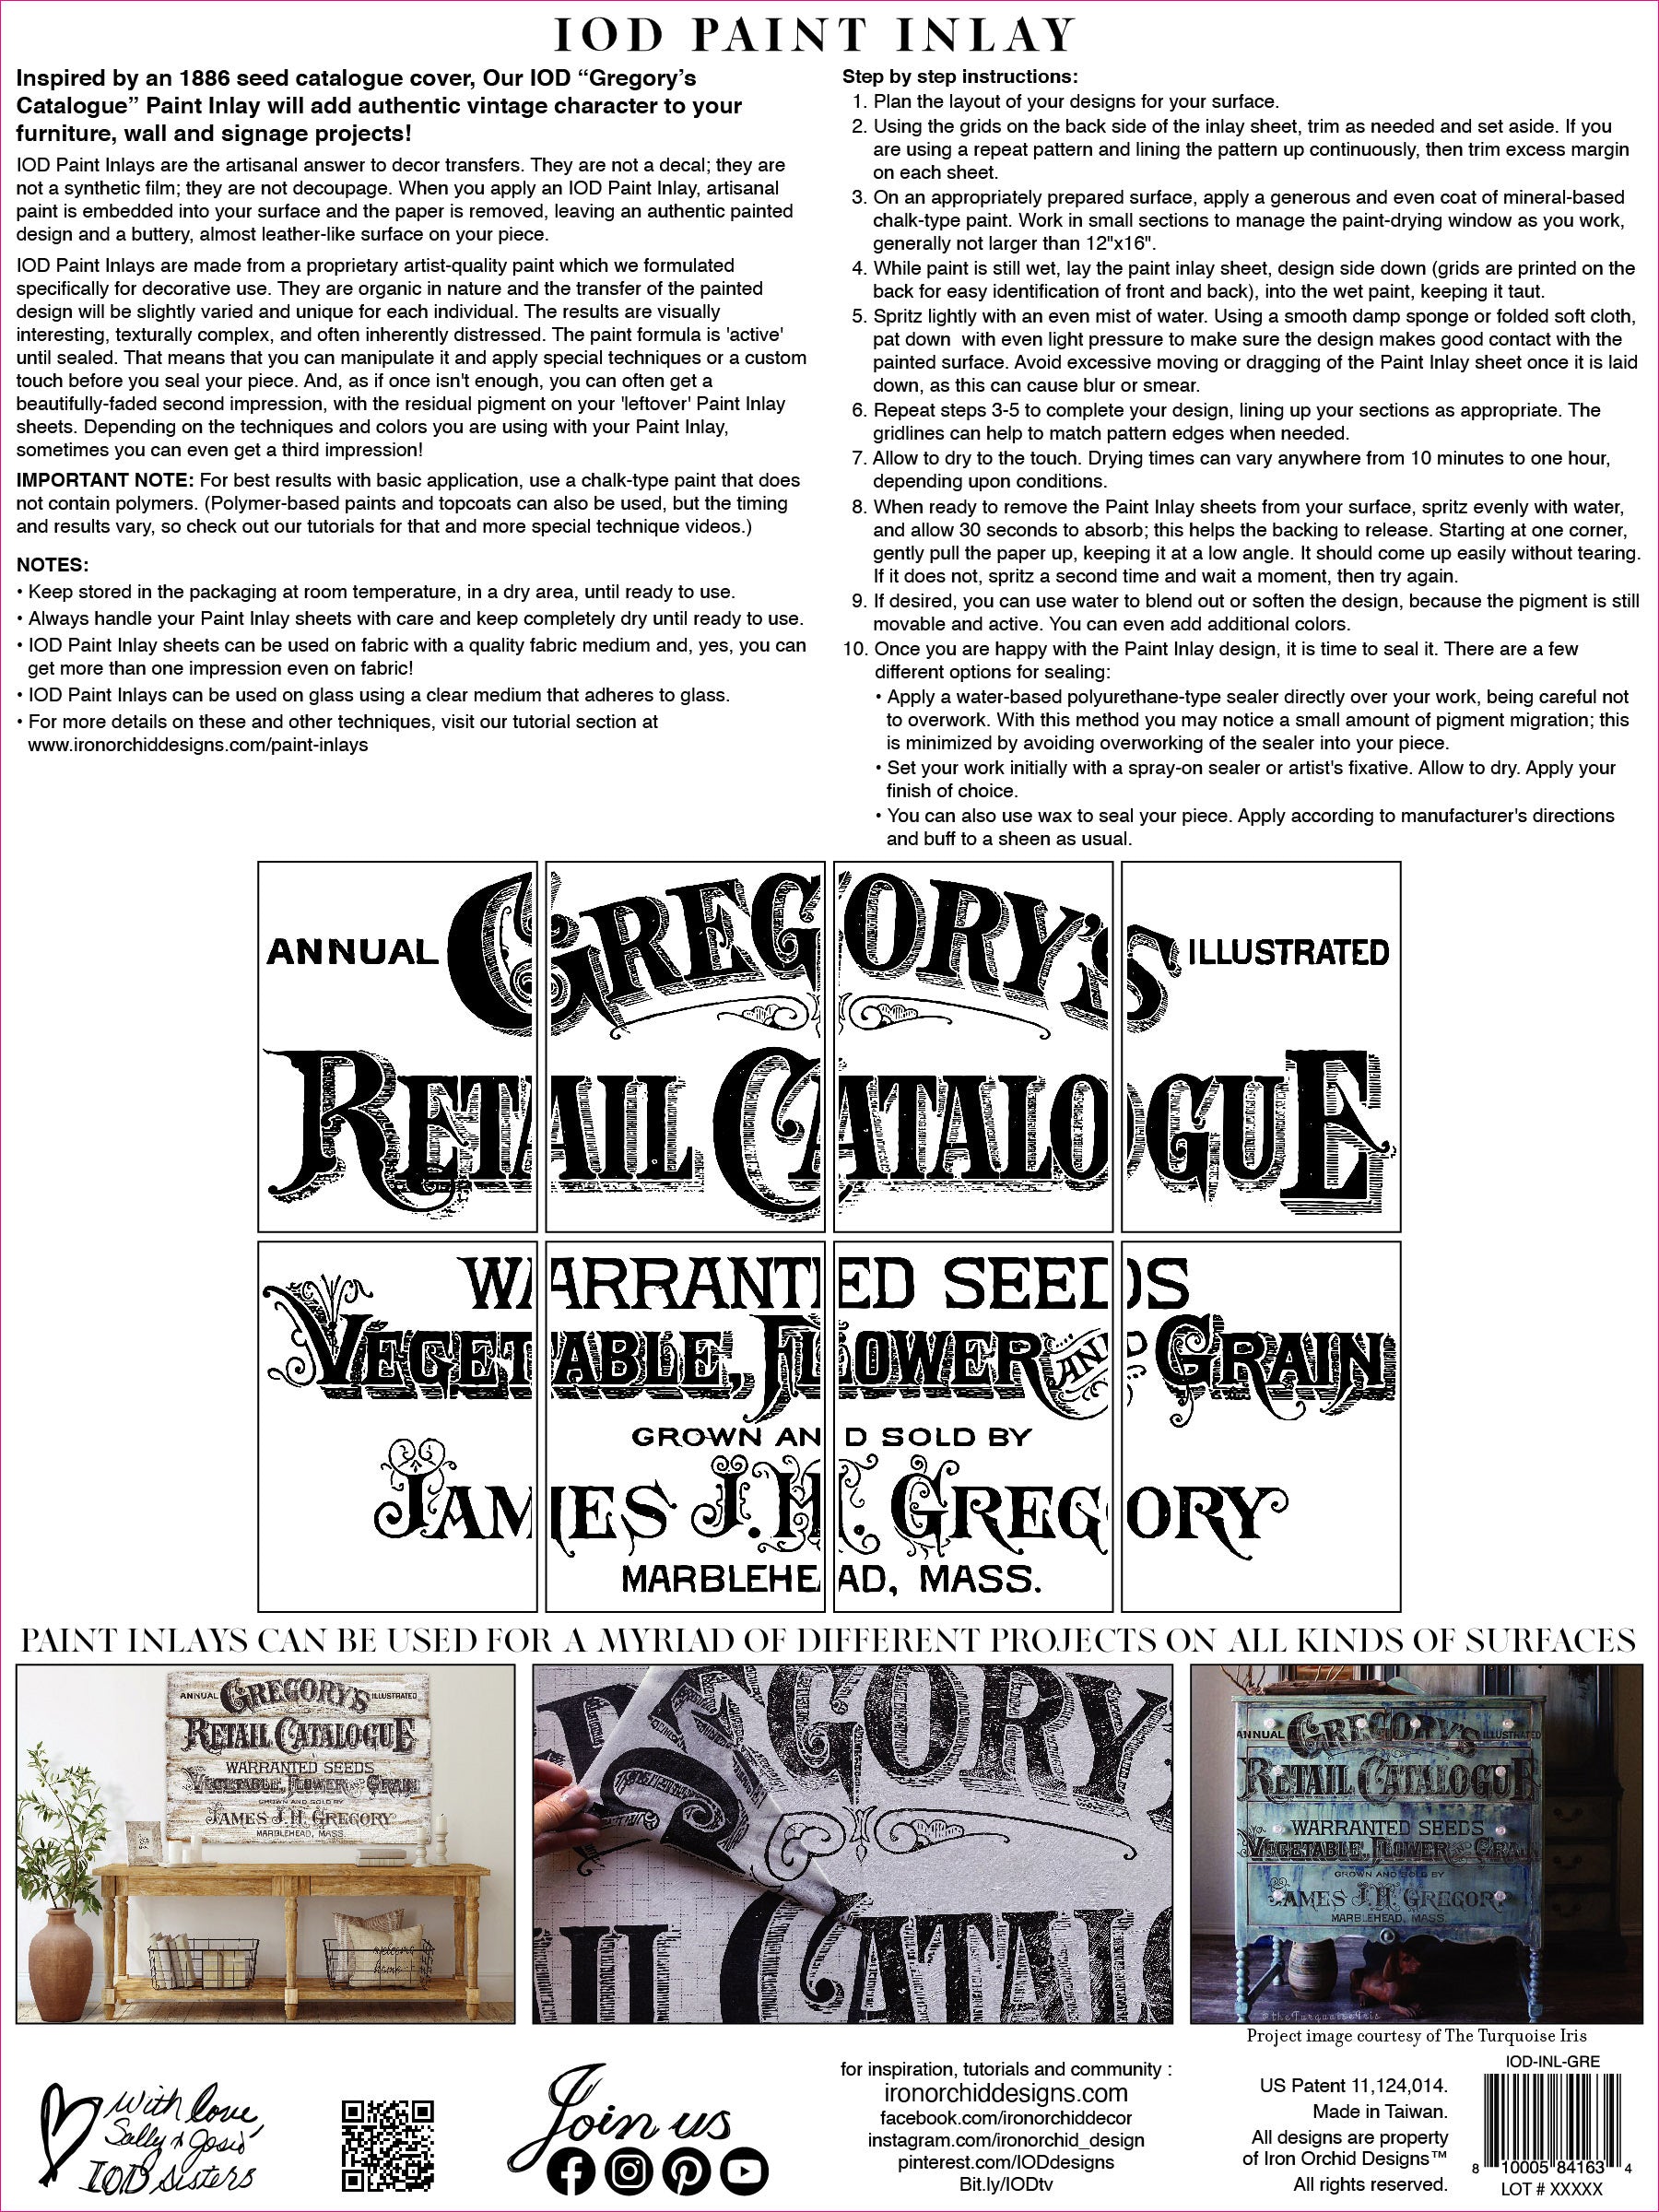 Gregorys Cataloque Paint Inlays by IOD